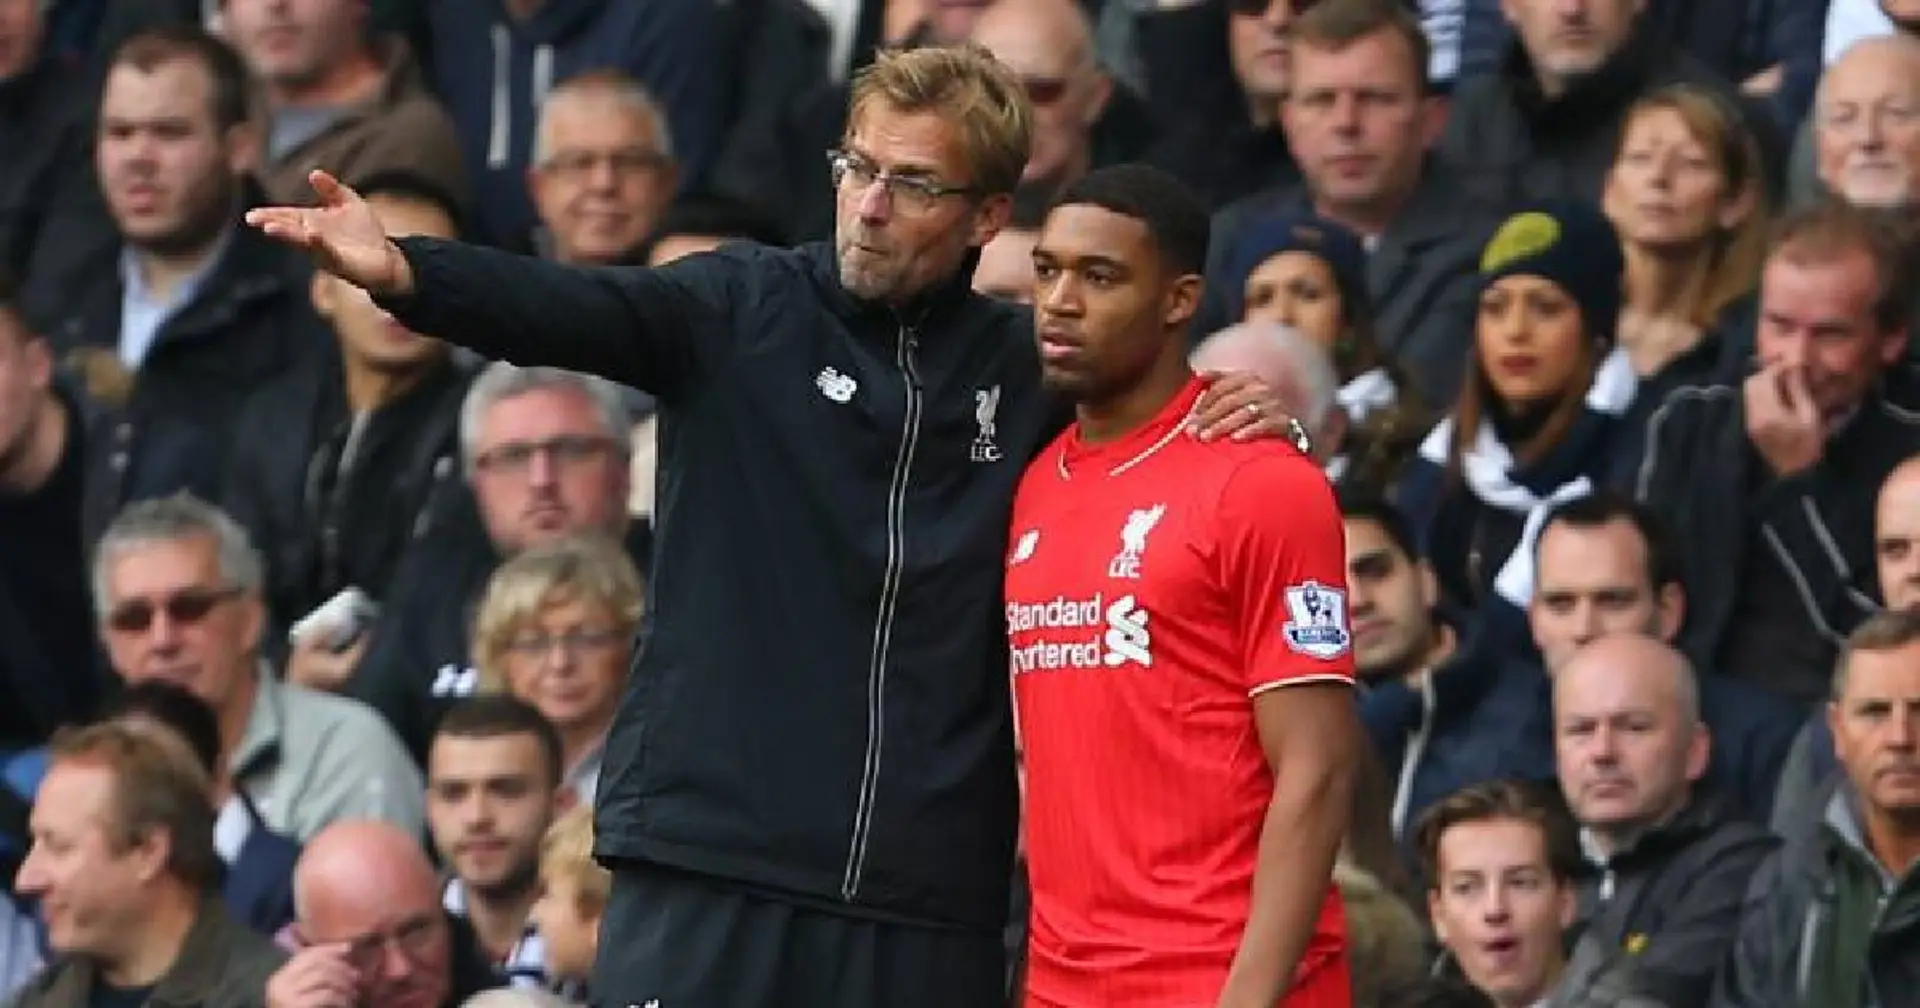 Jordon Ibe on Klopp: 'He gave me so much confidence, he was like a father figure on the pitch'